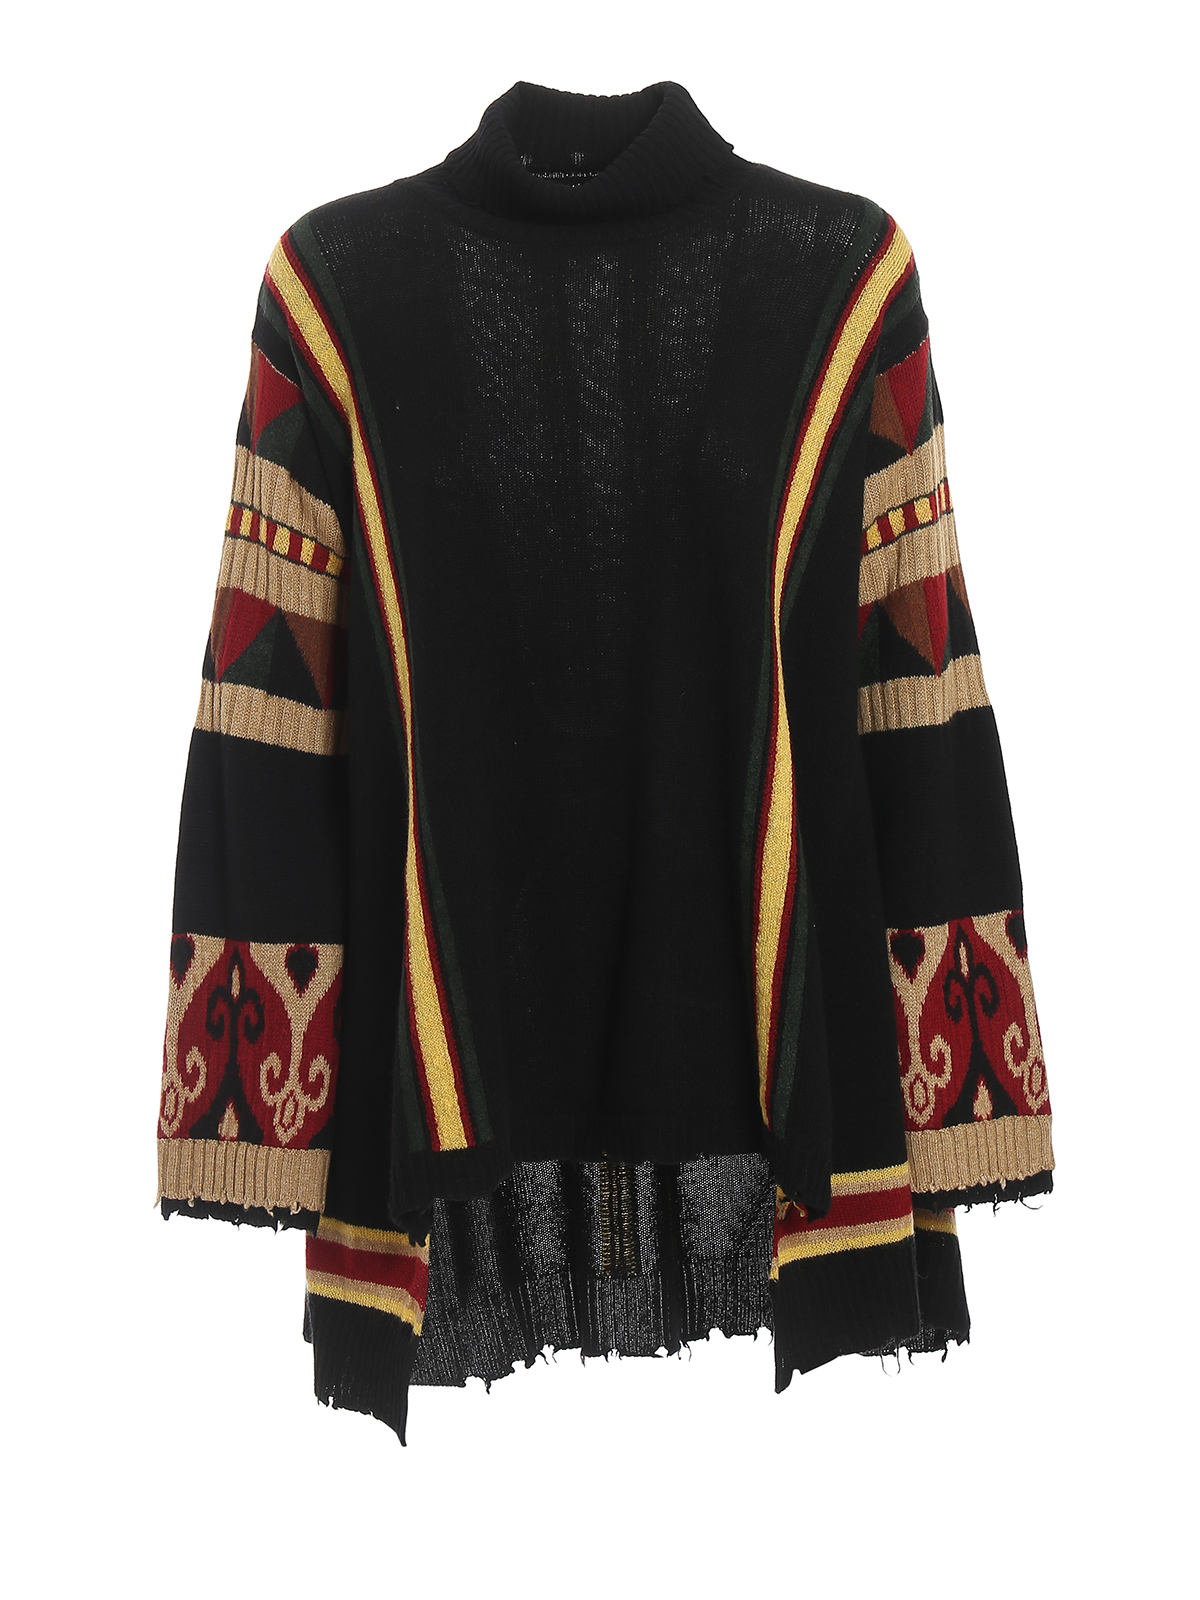 ETRO DESTROYED EDGES PATTERNED OVER SWEATER